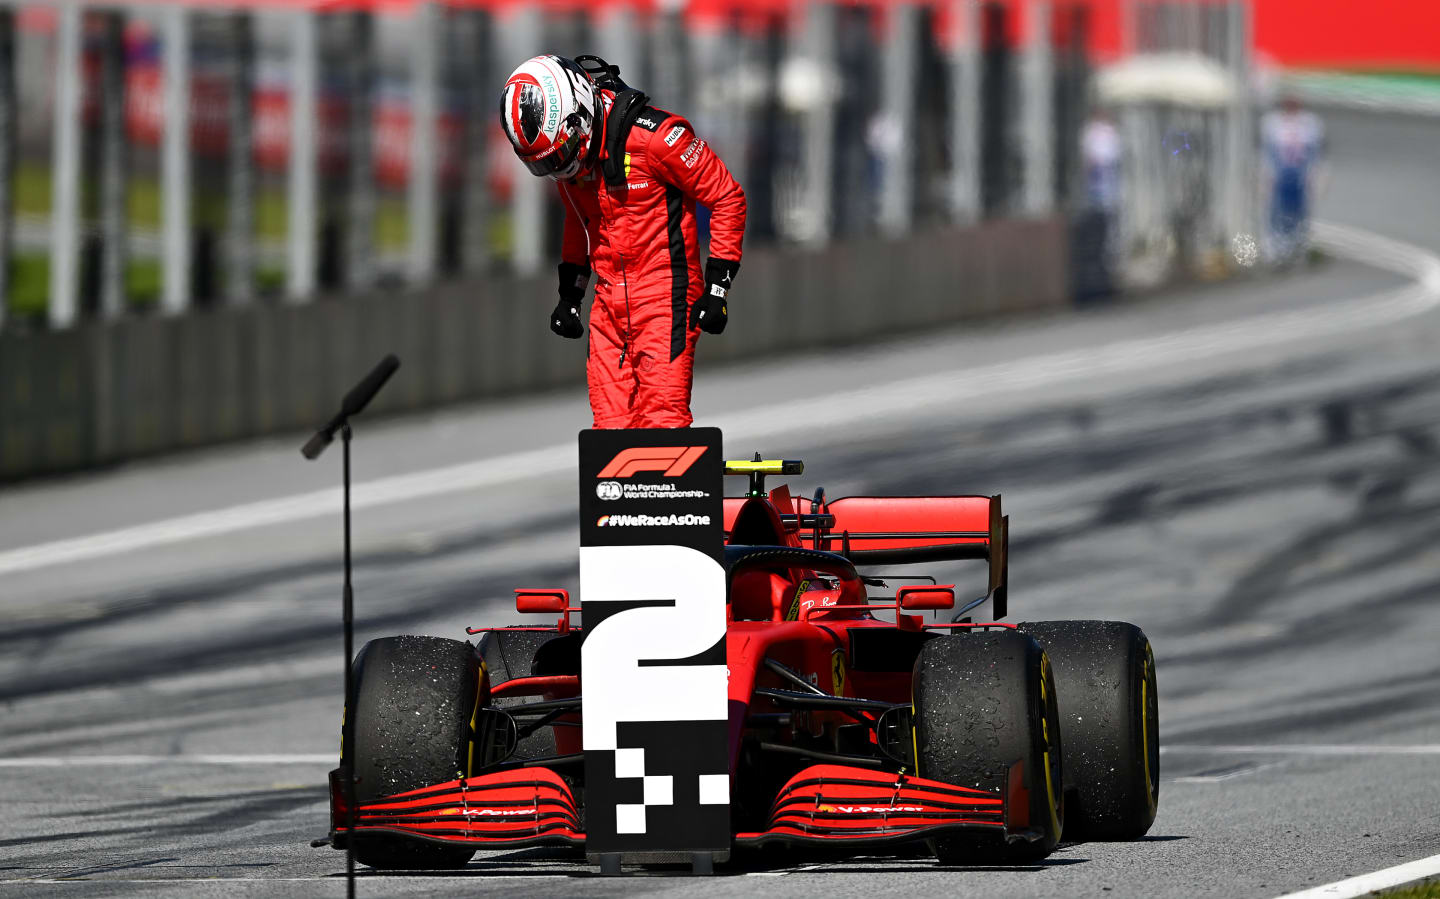 SPIELBERG, AUSTRIA - JULY 05: Second placed Charles Leclerc of Monaco and Ferrari gets out of his car during the Formula One Grand Prix of Austria at Red Bull Ring on July 05, 2020 in Spielberg, Austria. (Photo by Clive Mason - Formula 1/Formula 1 via Getty Images)